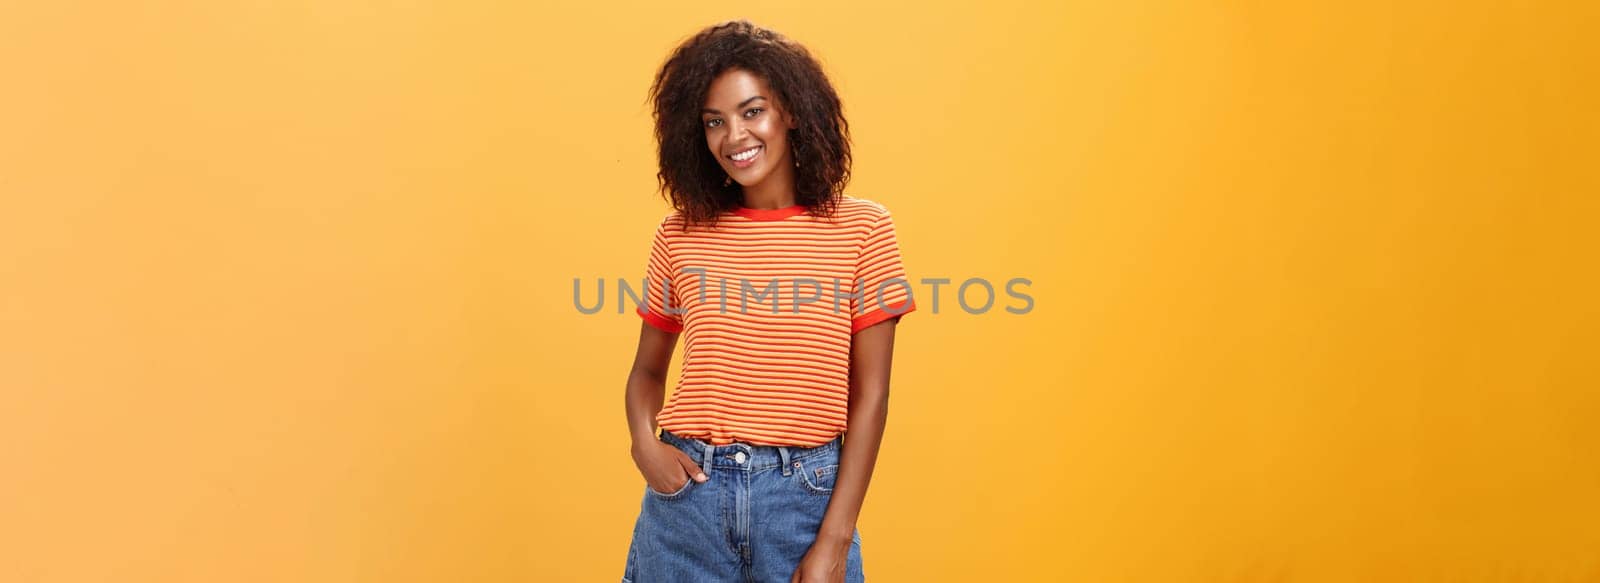 Ready to travel world. Energetic confident and attractive dark-skinned woman with curly hair holding hand in pocket of denim shorts smiling joyfully posing over orange background carefree and friendly.